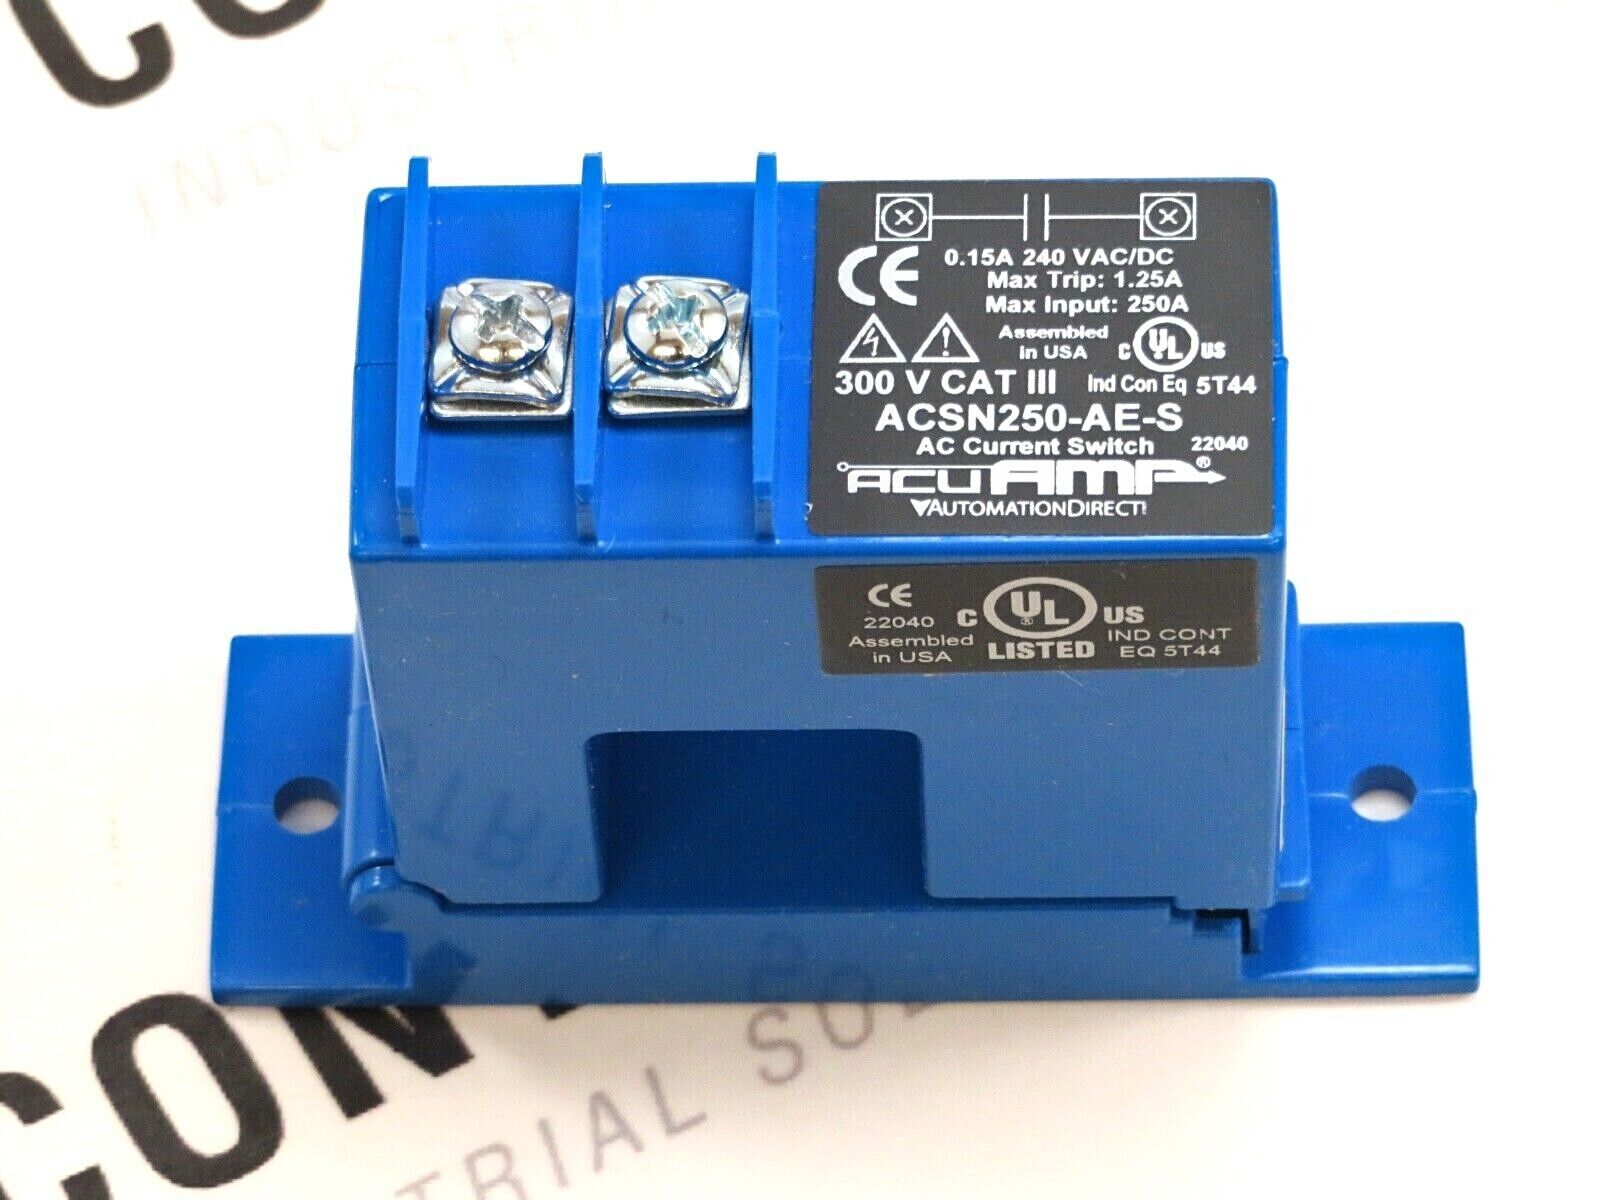 Acuamp ACSN250-AE-S AC Current Switch